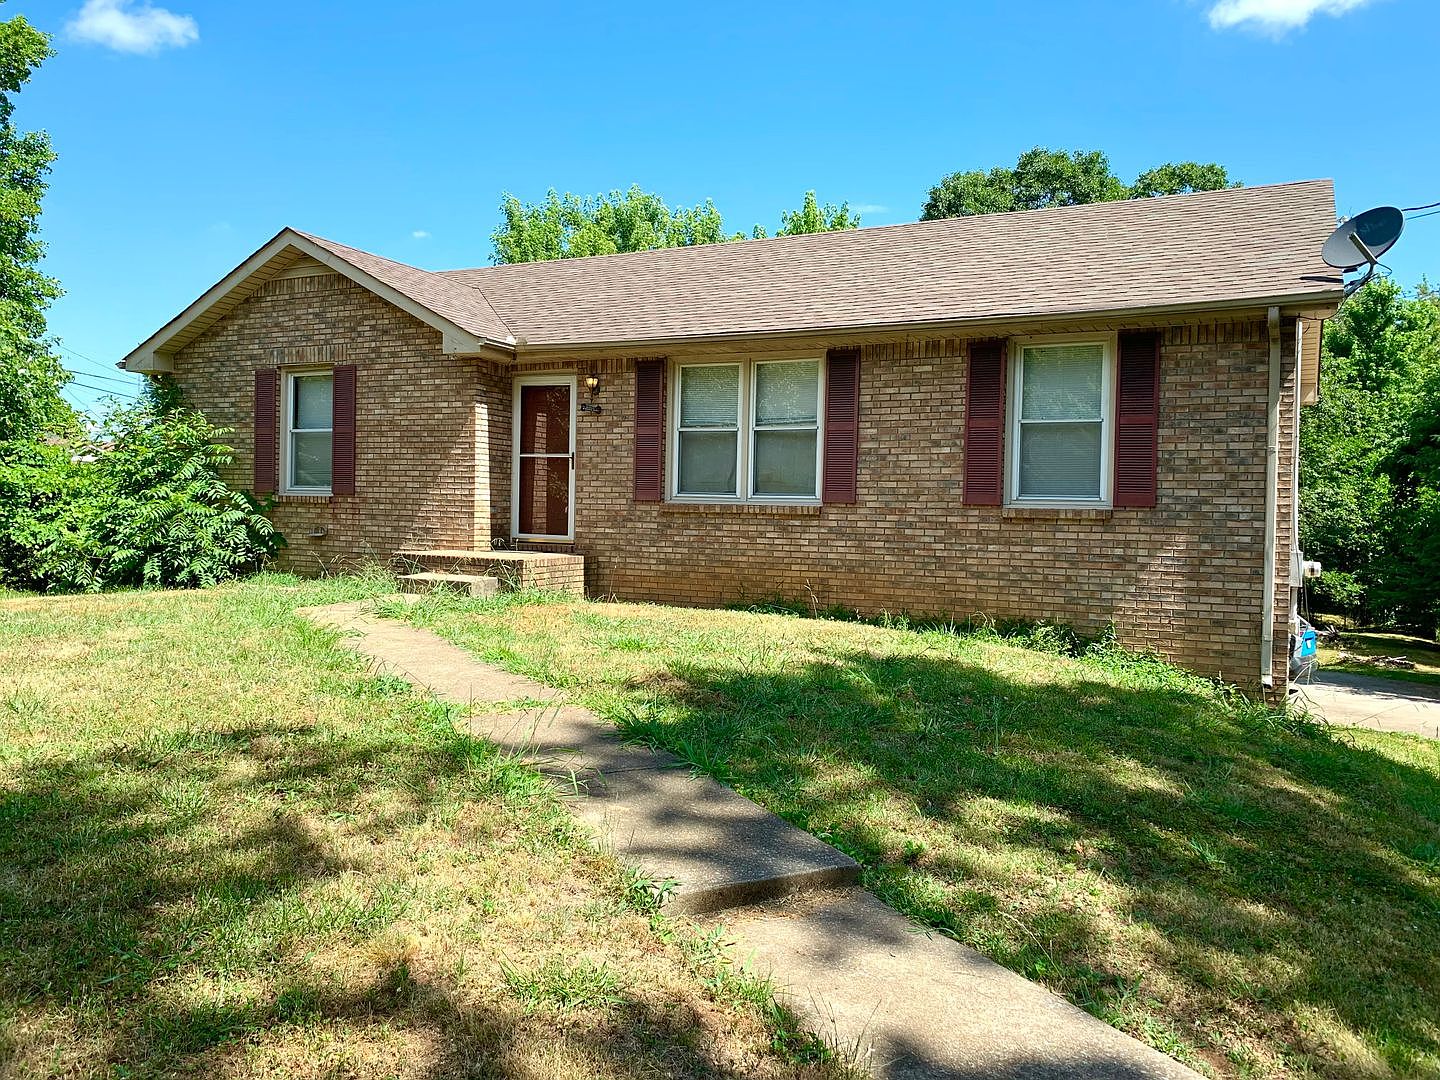 309 Andrew Dr, Clarksville, TN 37042 | Zillow